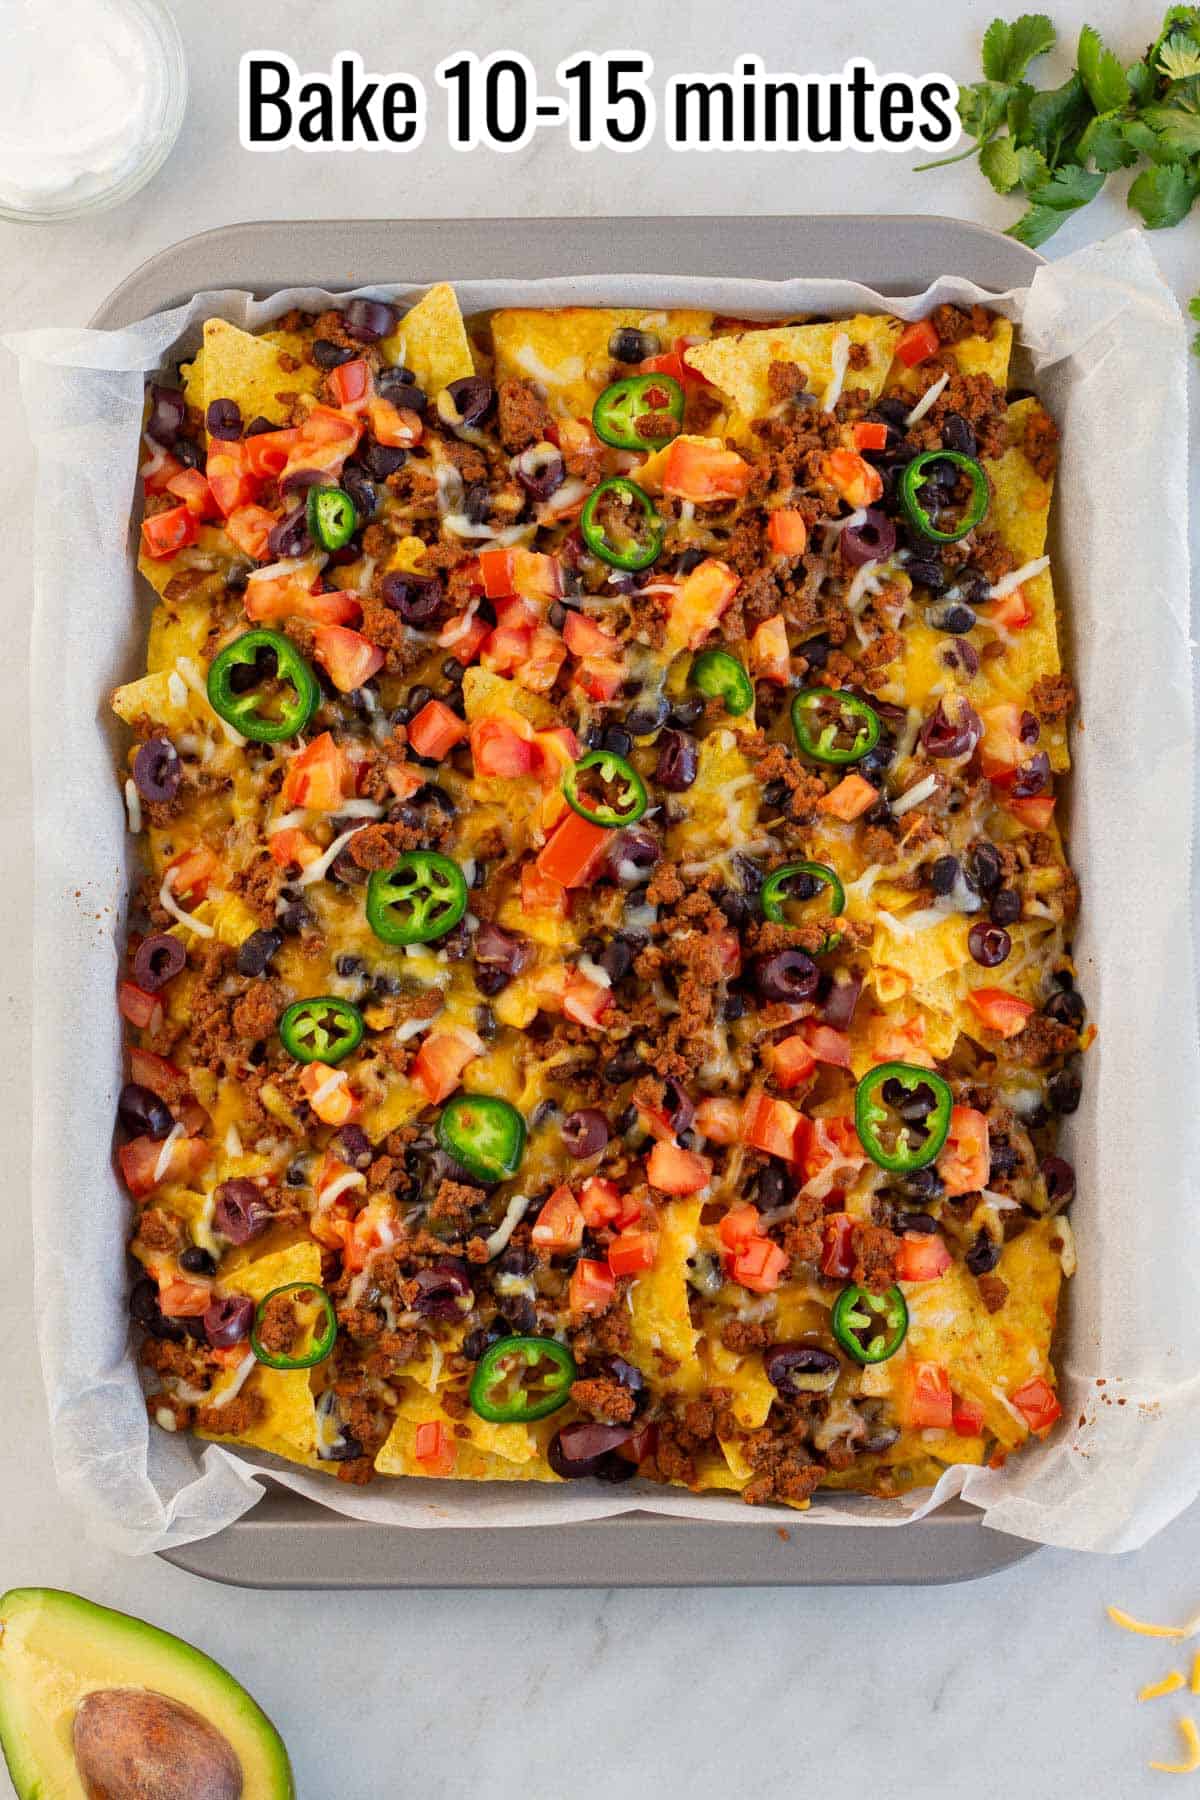 baked nachos out of the oven.